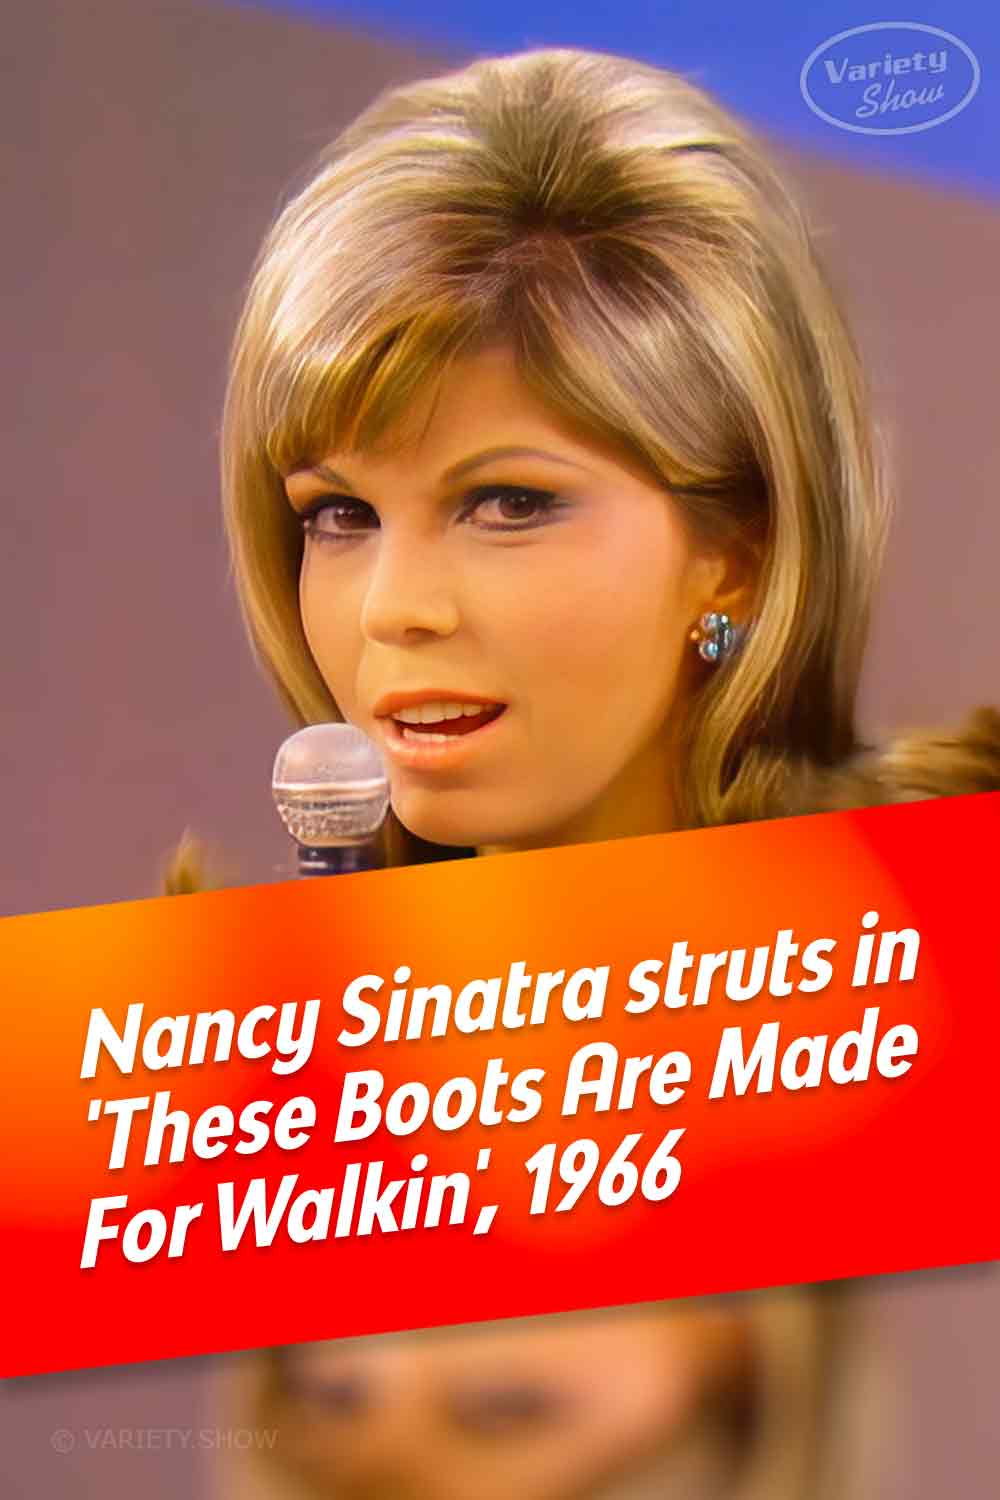 Nancy Sinatra struts in \'These Boots Are Made For Walkin\', 1966